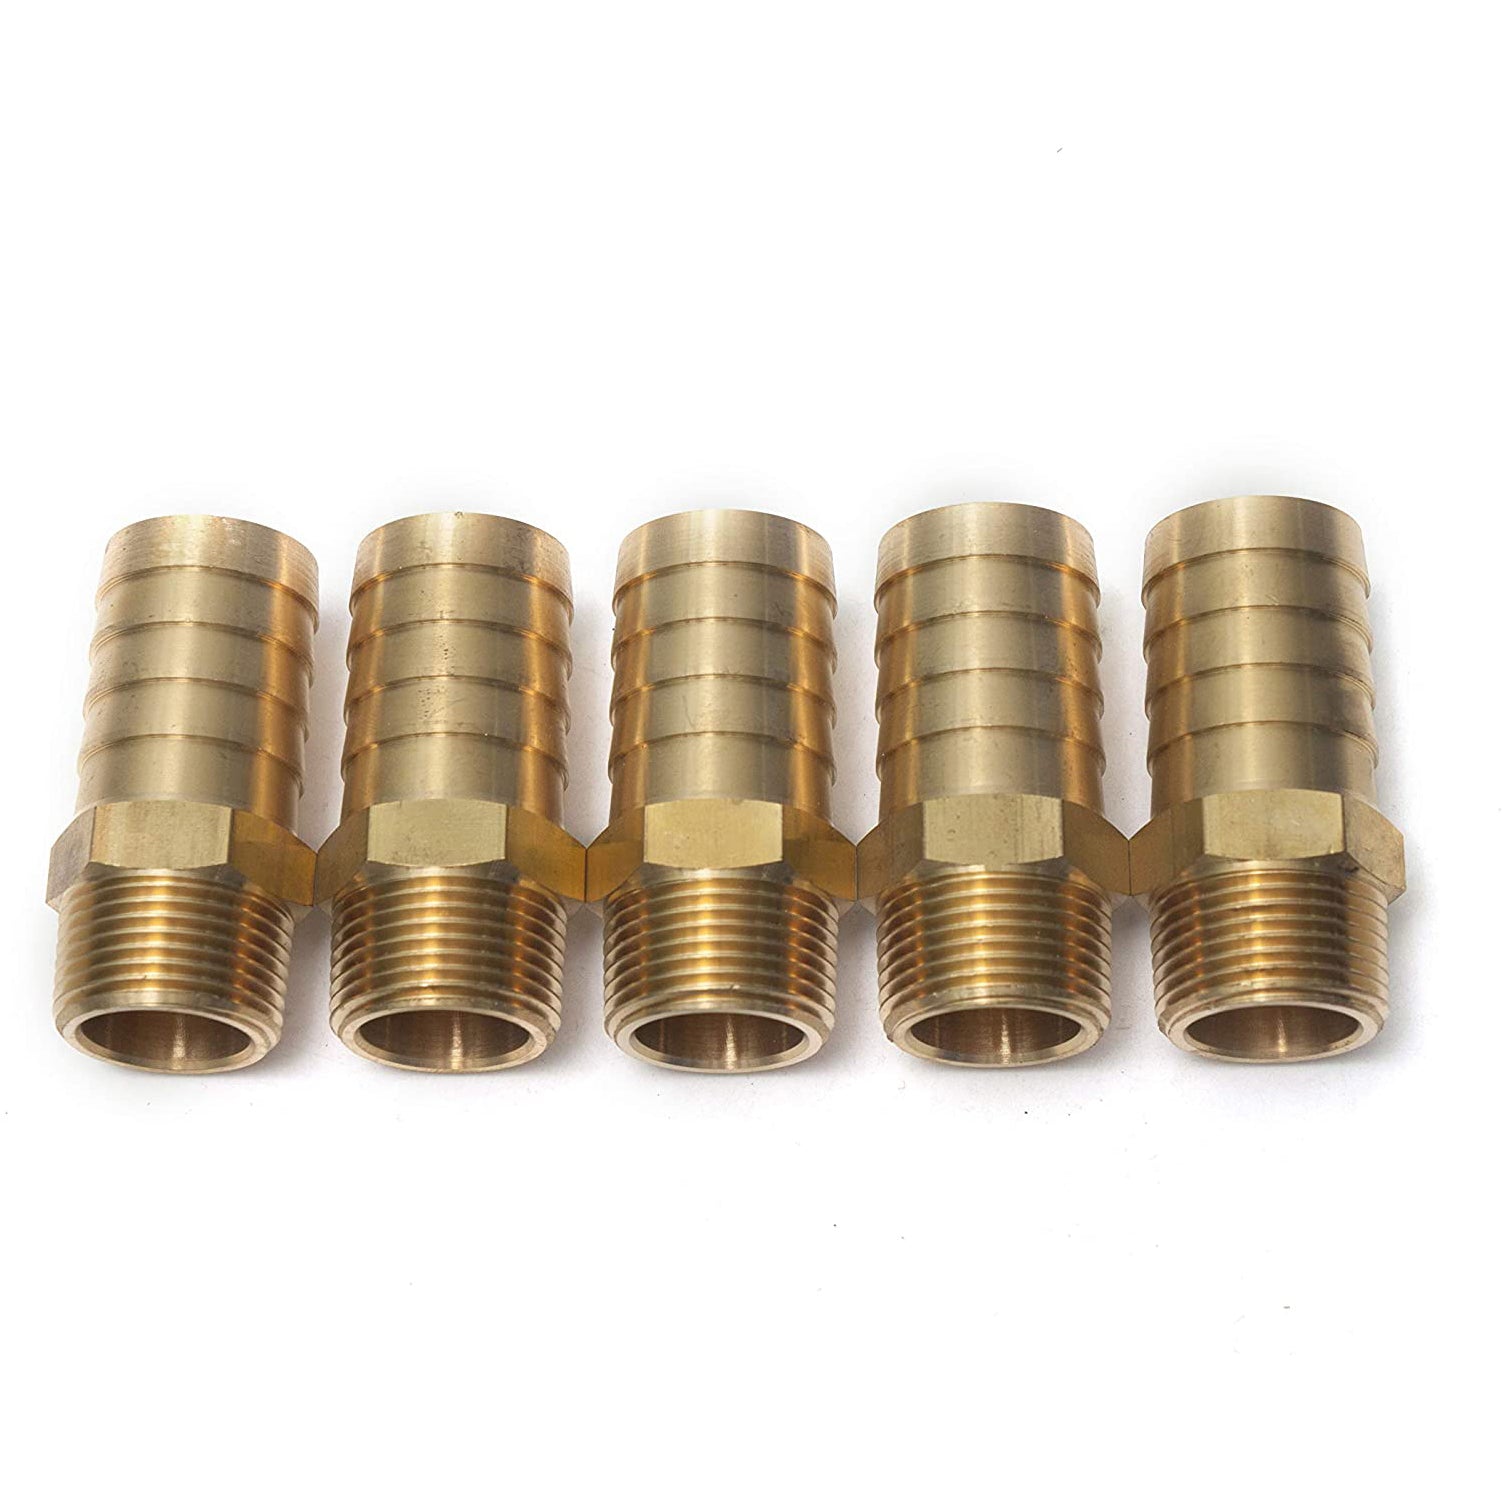 LTWFITTING Brass Barbed Fitting Coupler/Connector 3/4-Inch Male BSPT x 1-Inch(25mm) Hose Barb Fuel Gas Water (Pack of 5)